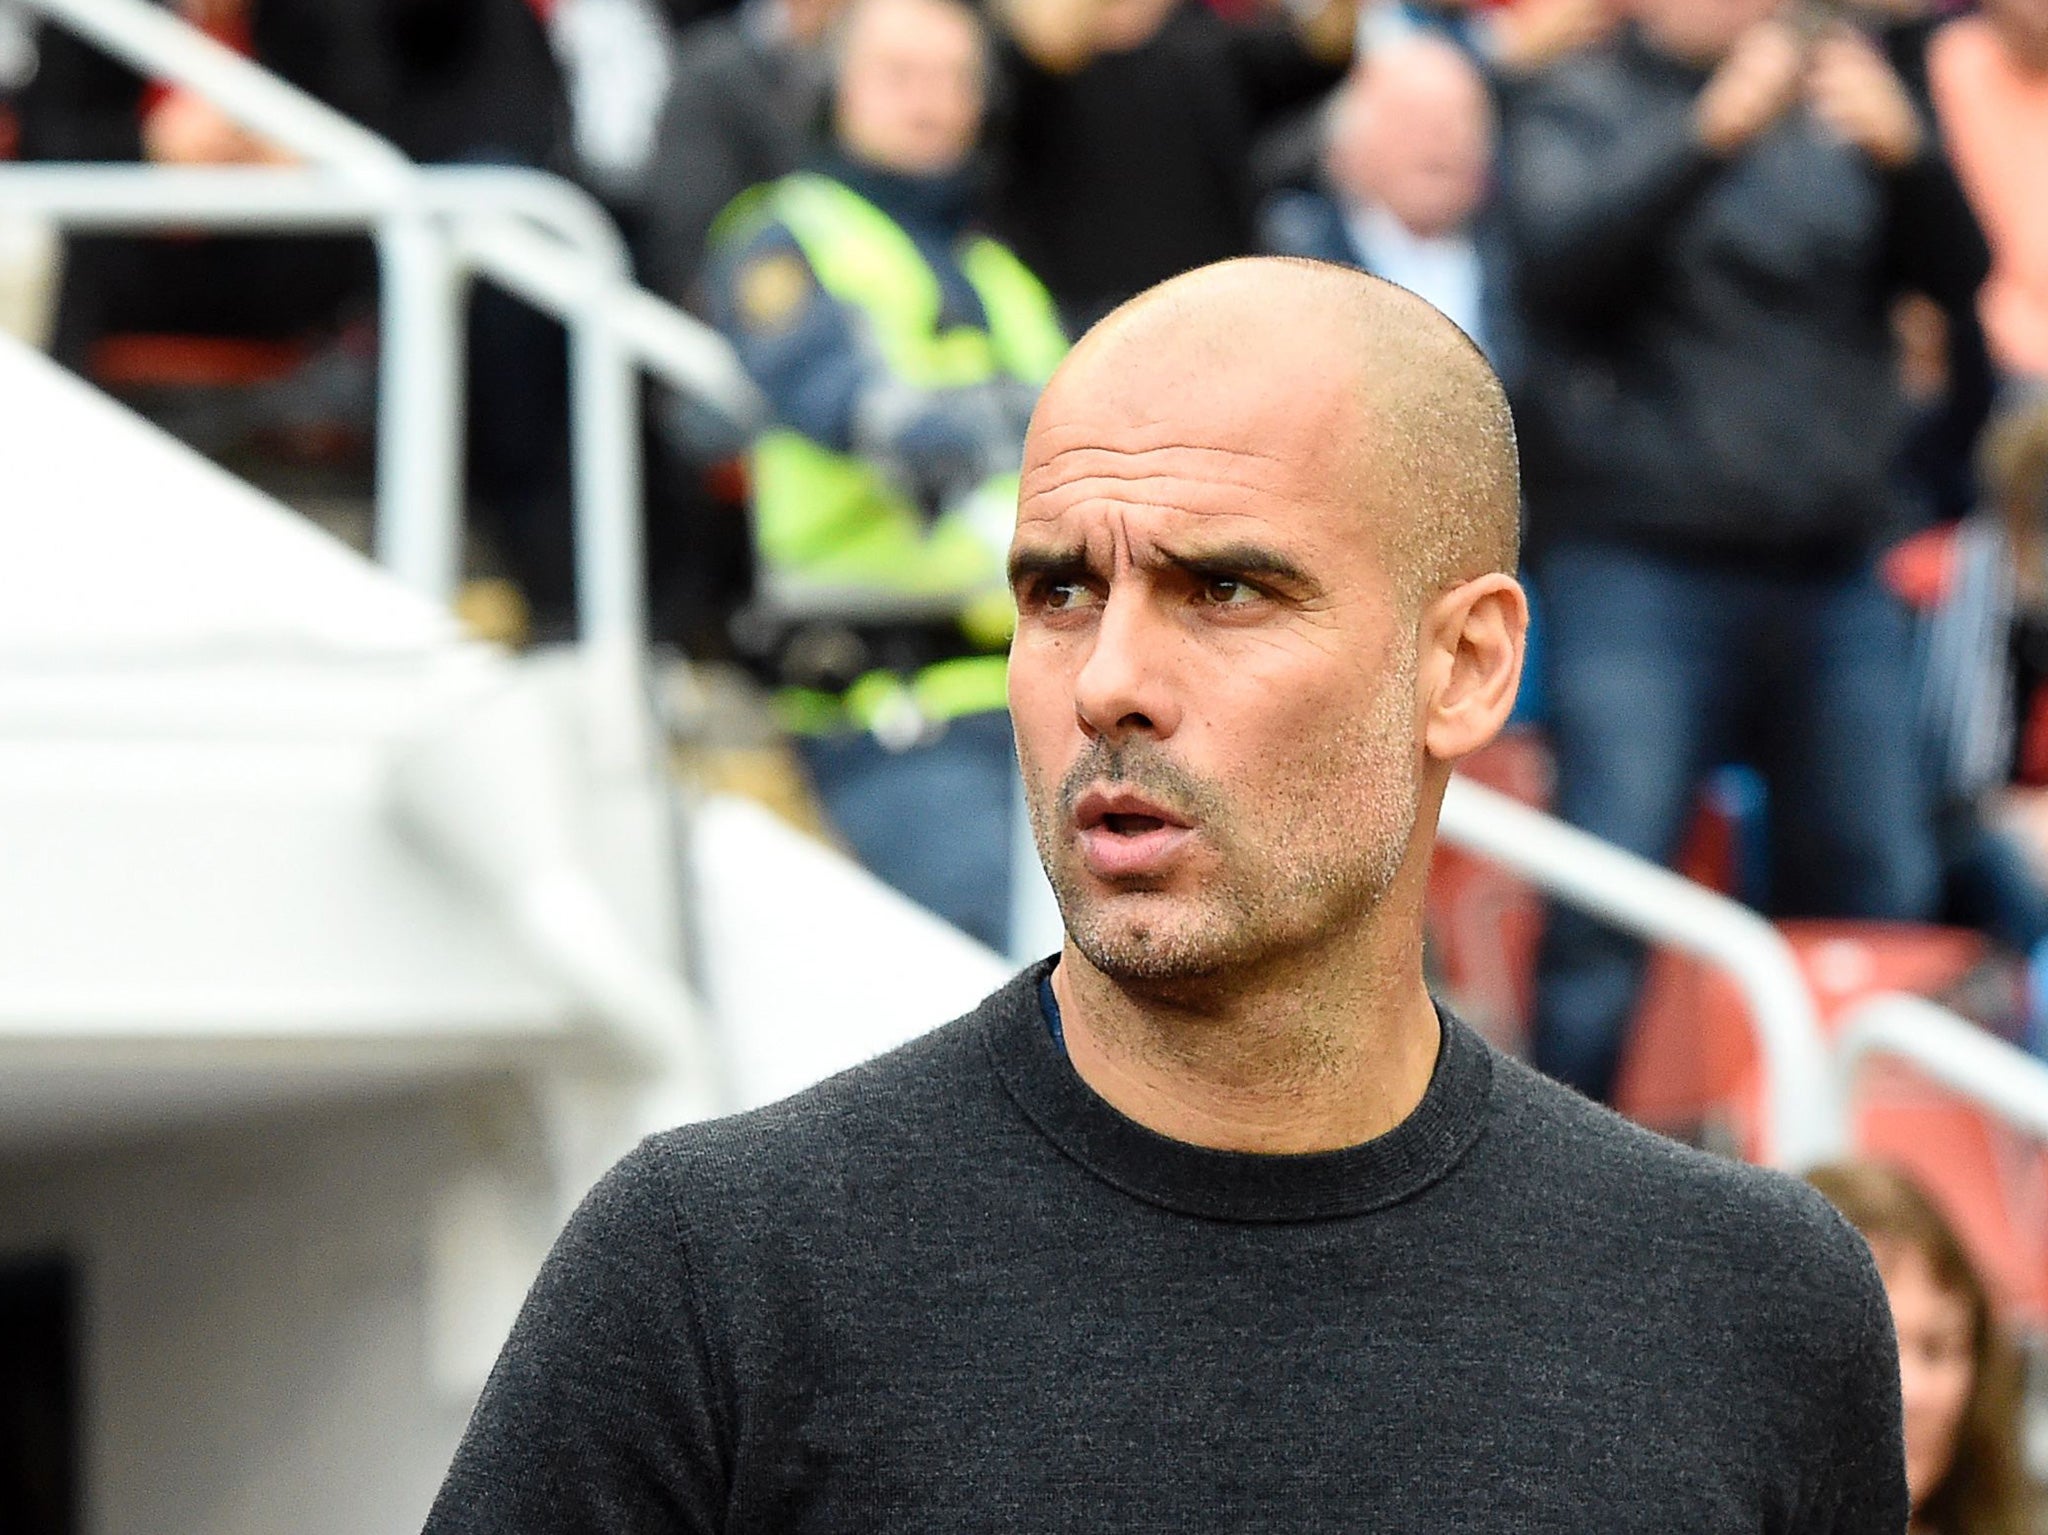 Guardiola will come up against old foe Mourinho in cross-town rivalry